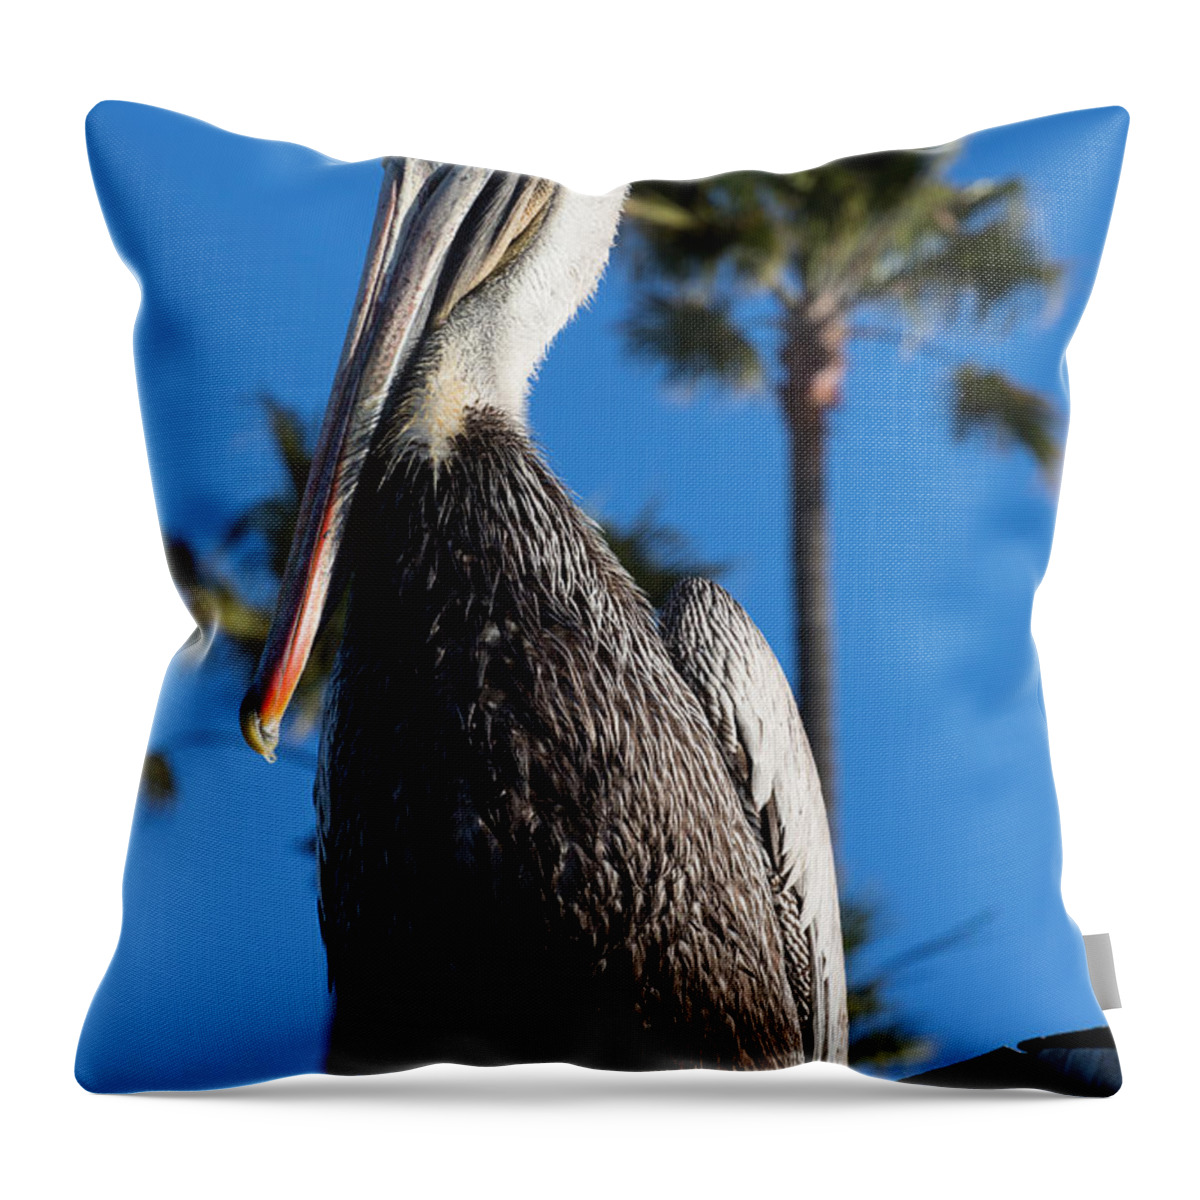 Blond Throw Pillow featuring the photograph Blond Pelican by John Daly